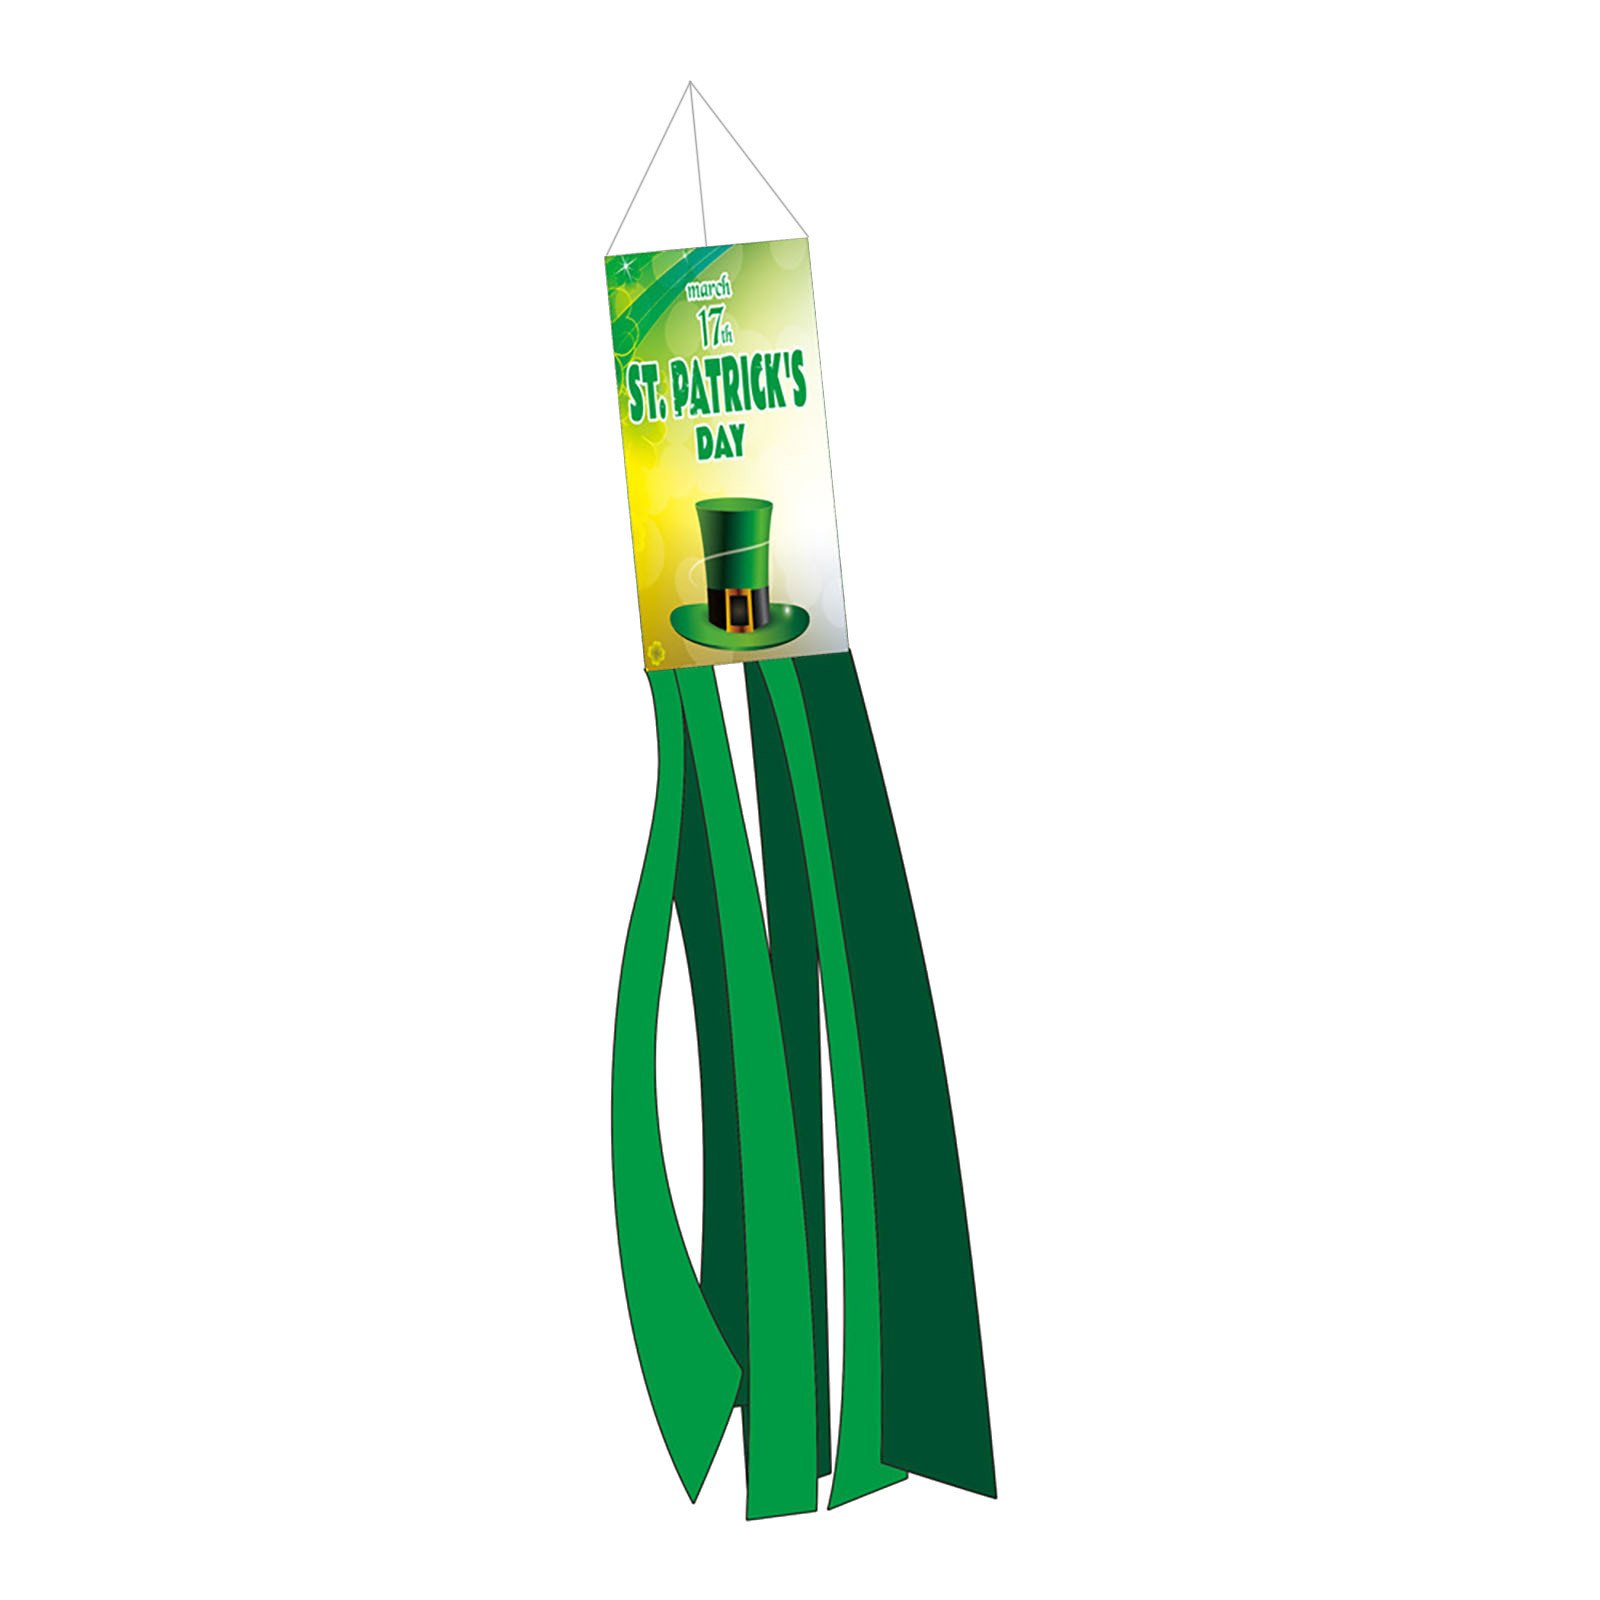 solacol Sunflower Party Decorations Holiday Party Decorations Garden Party Decorations St. Patricks Day Windsock Polyester Garden Windsock Garden Party Decoration 4/20 Party Decorations - image 1 of 1